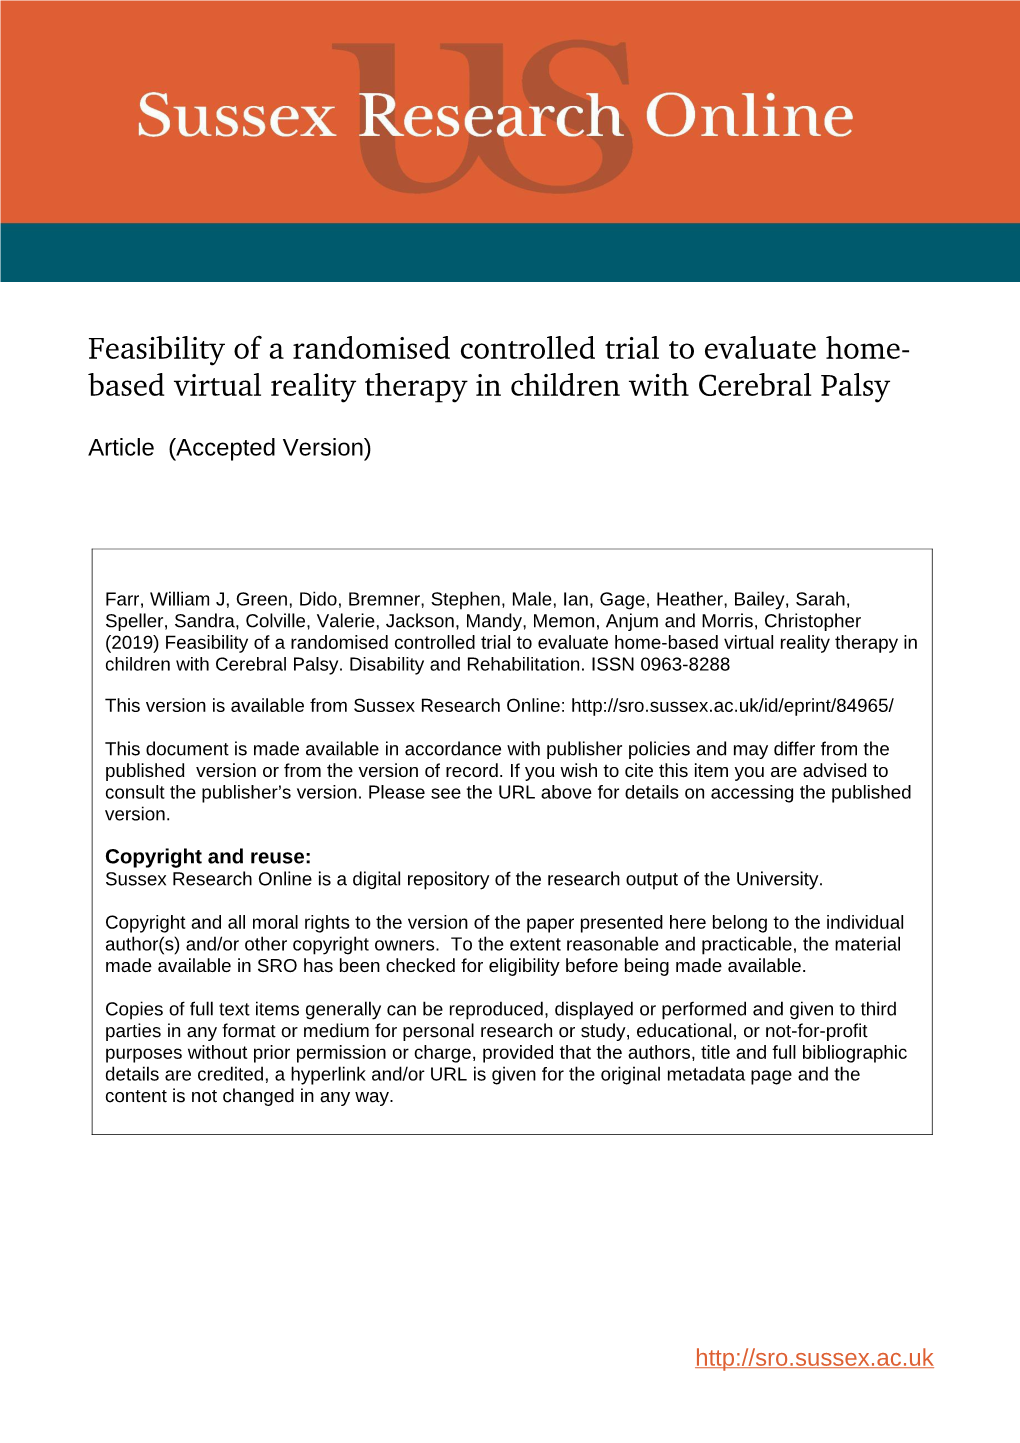 Feasibility of a Randomised Controlled Trial to Evaluate Home Based Virtual